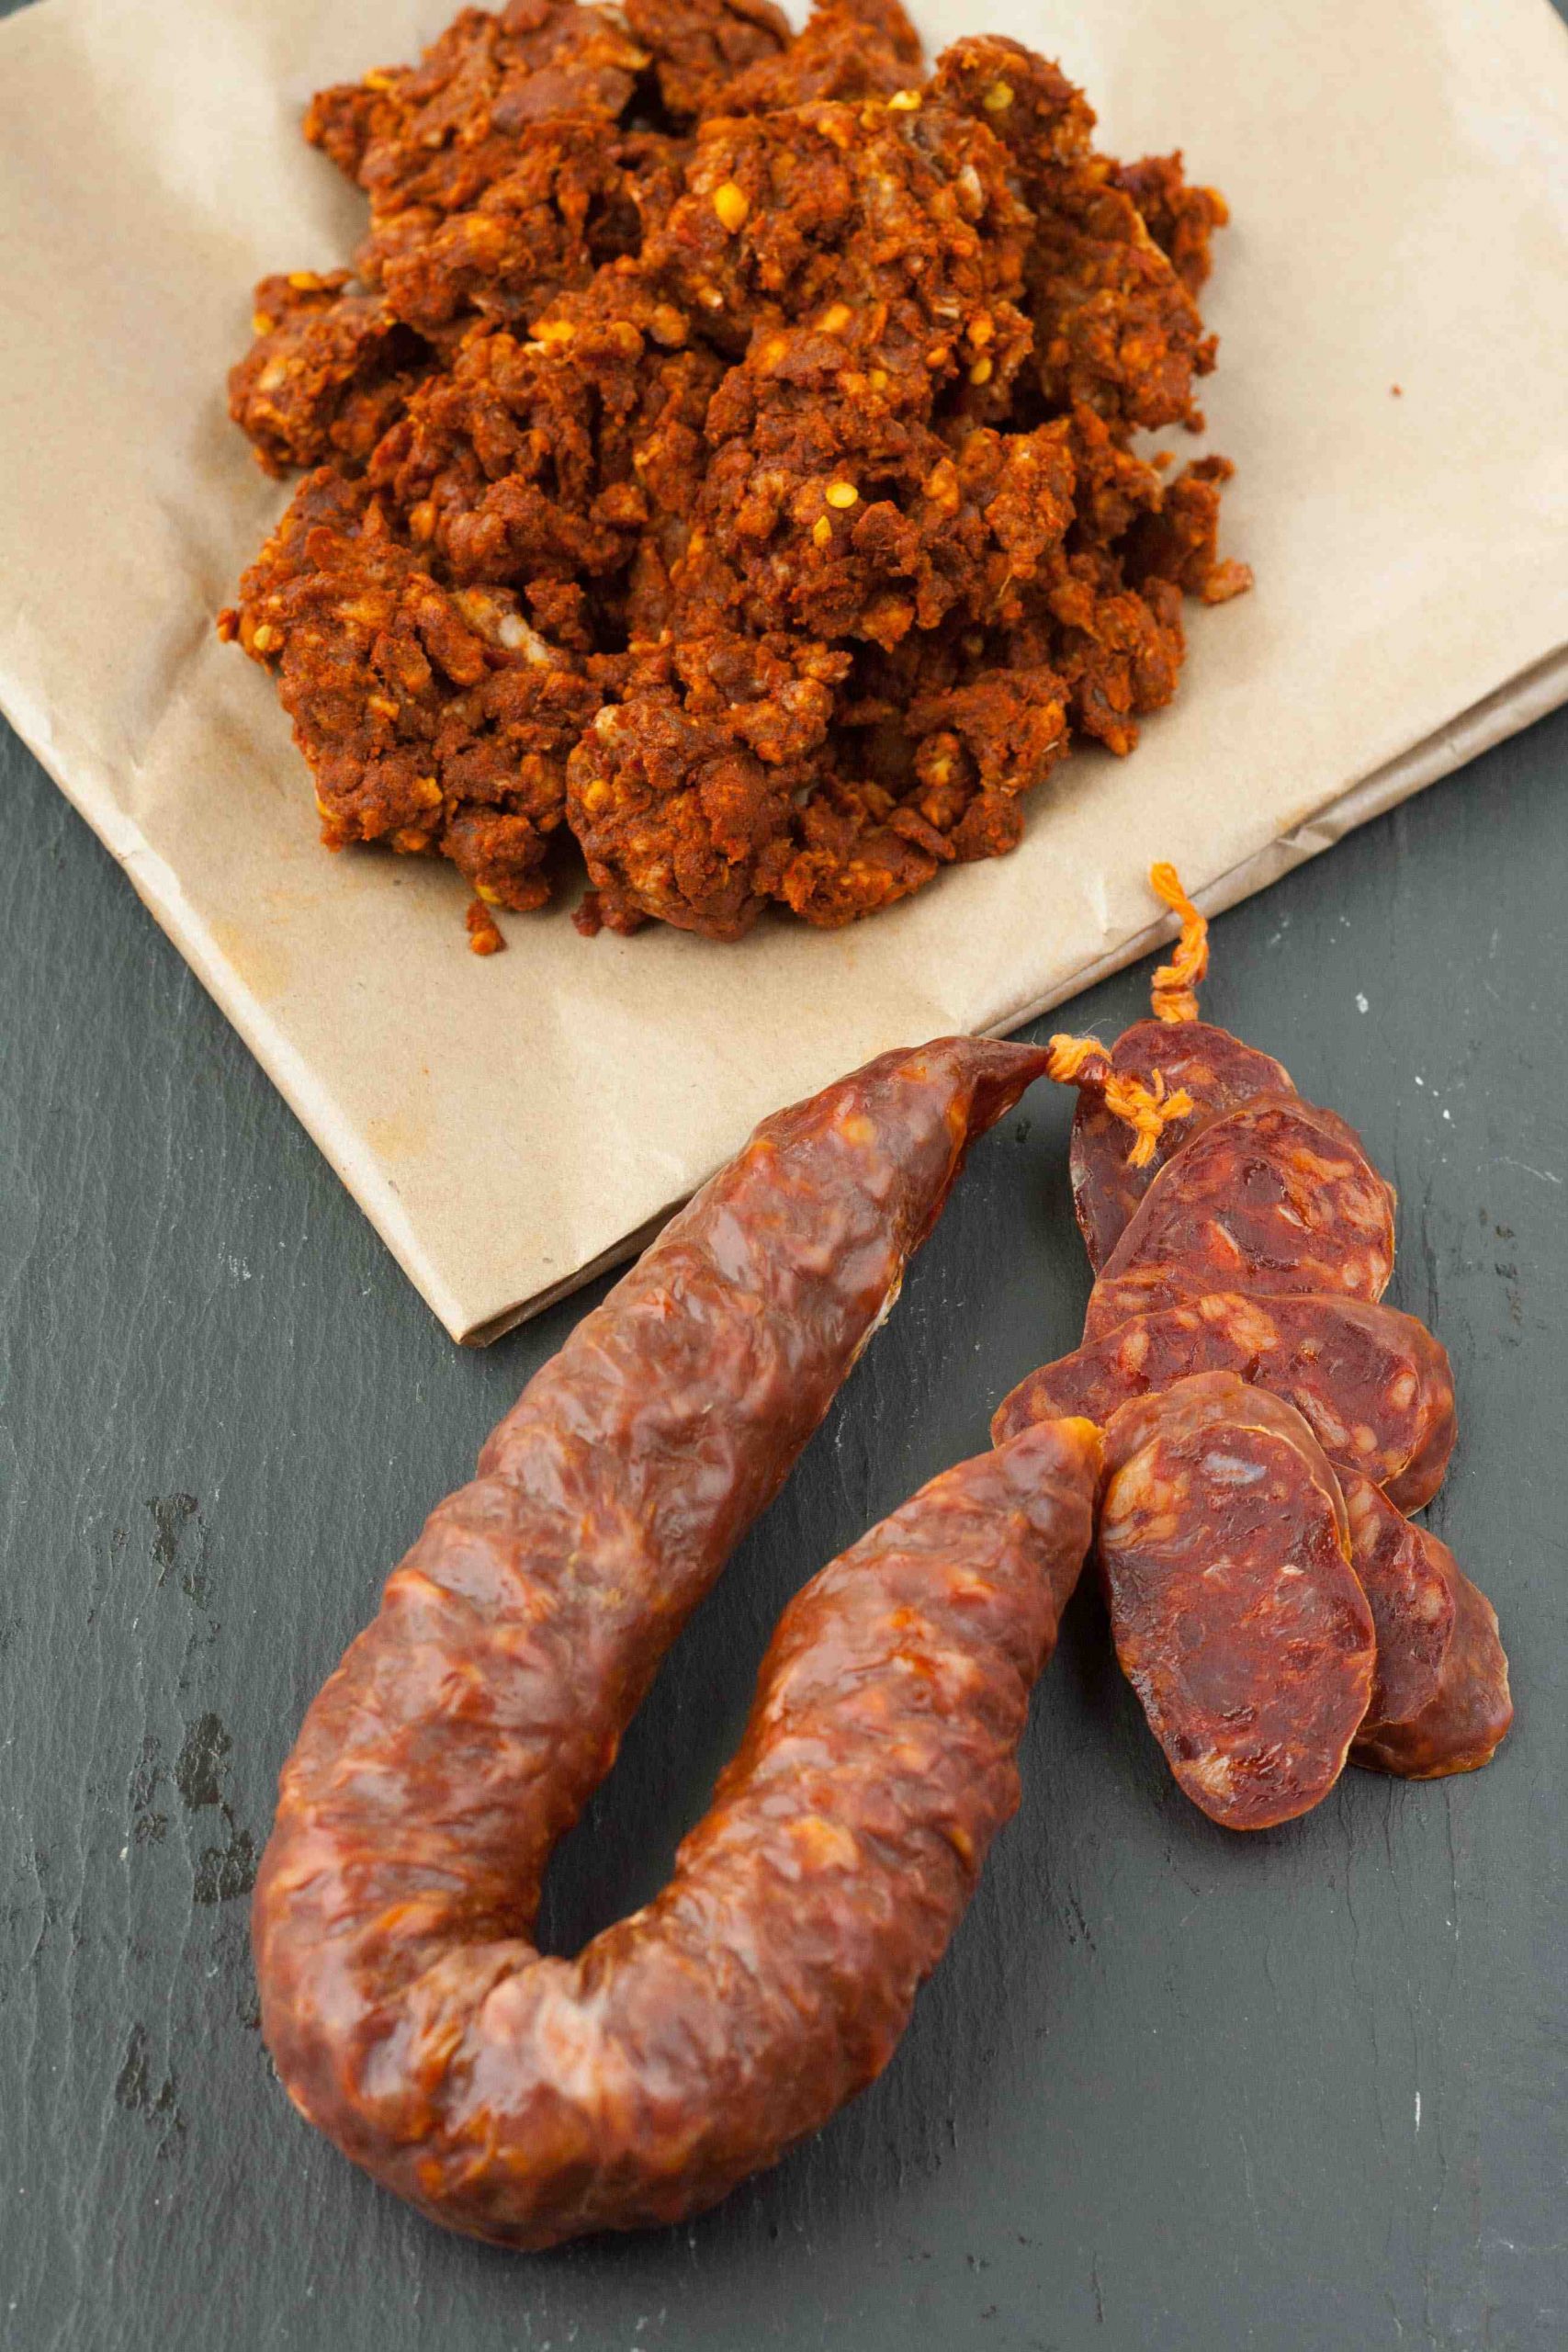 What is beef chorizo made of?